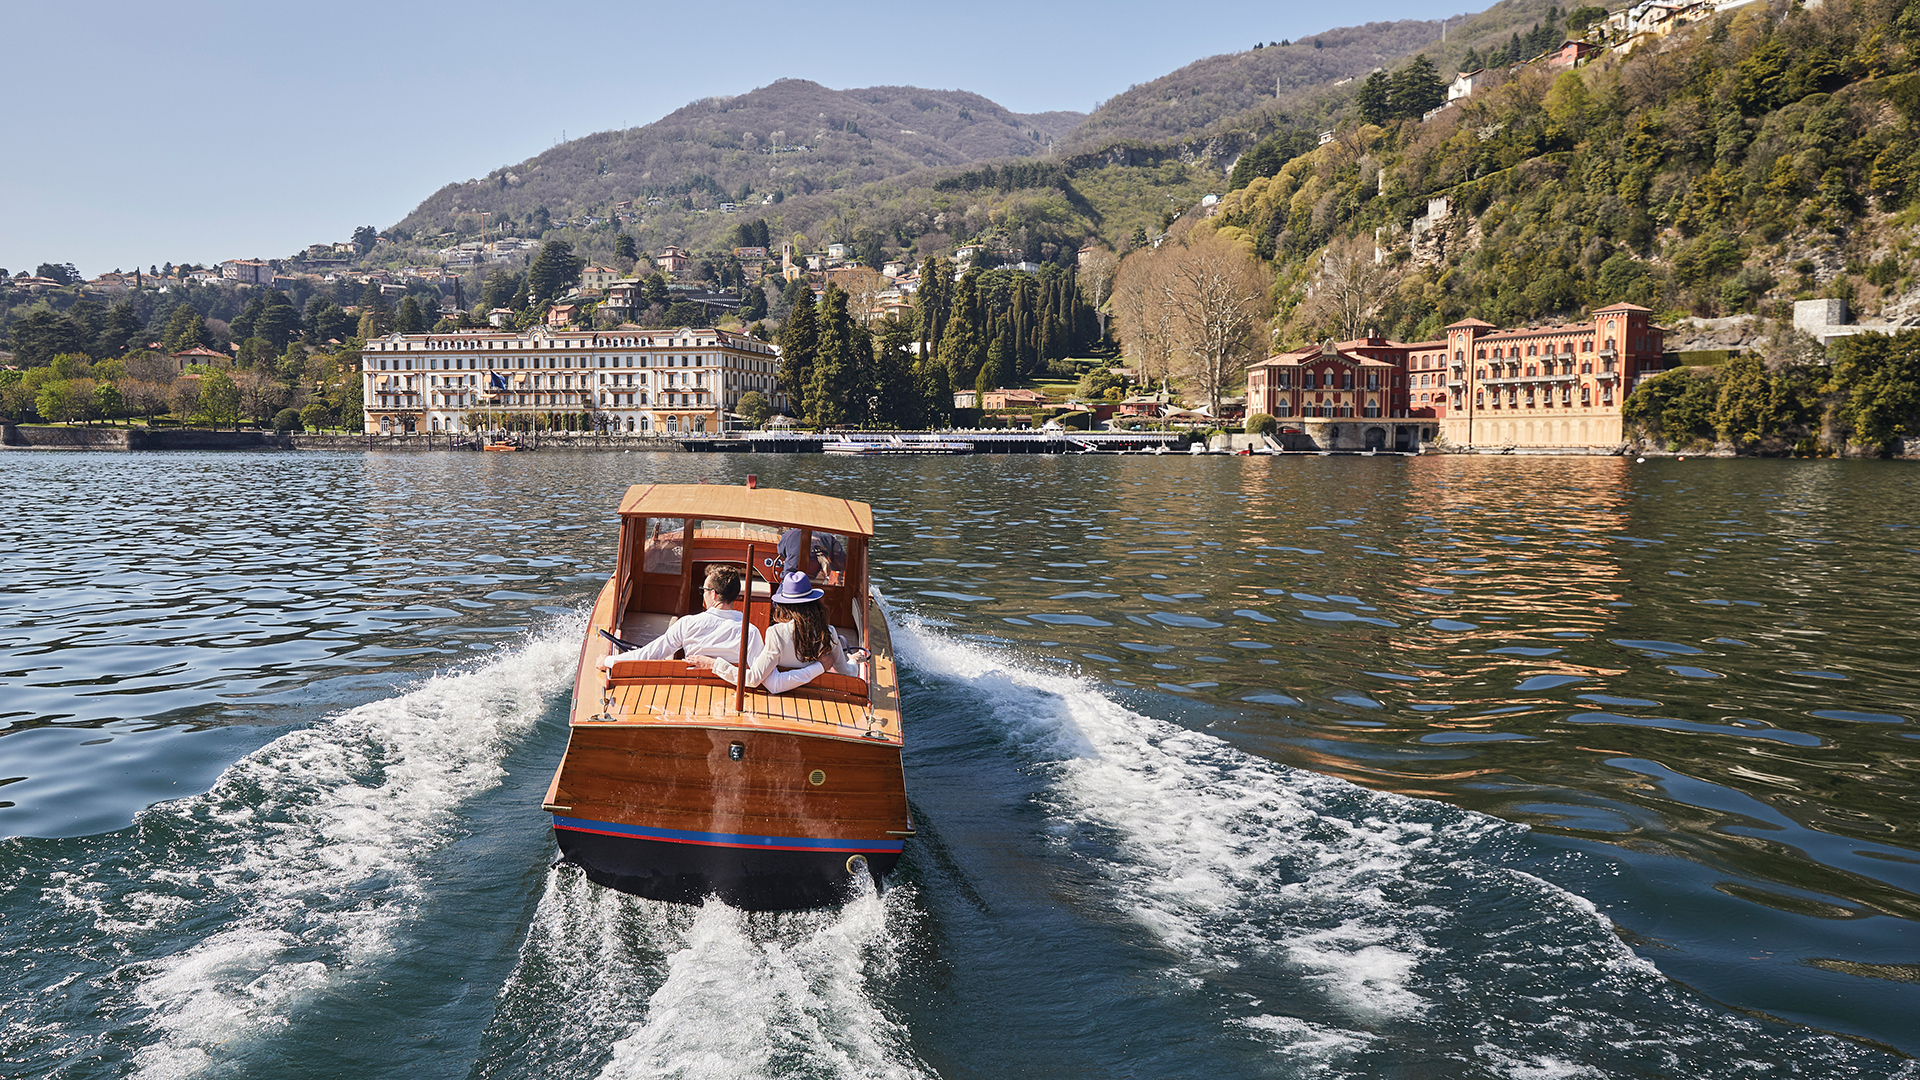 lake-como’s-villa-d’este-hotel-is-turning-150-here’s-how-you-can-join-the-celebration.